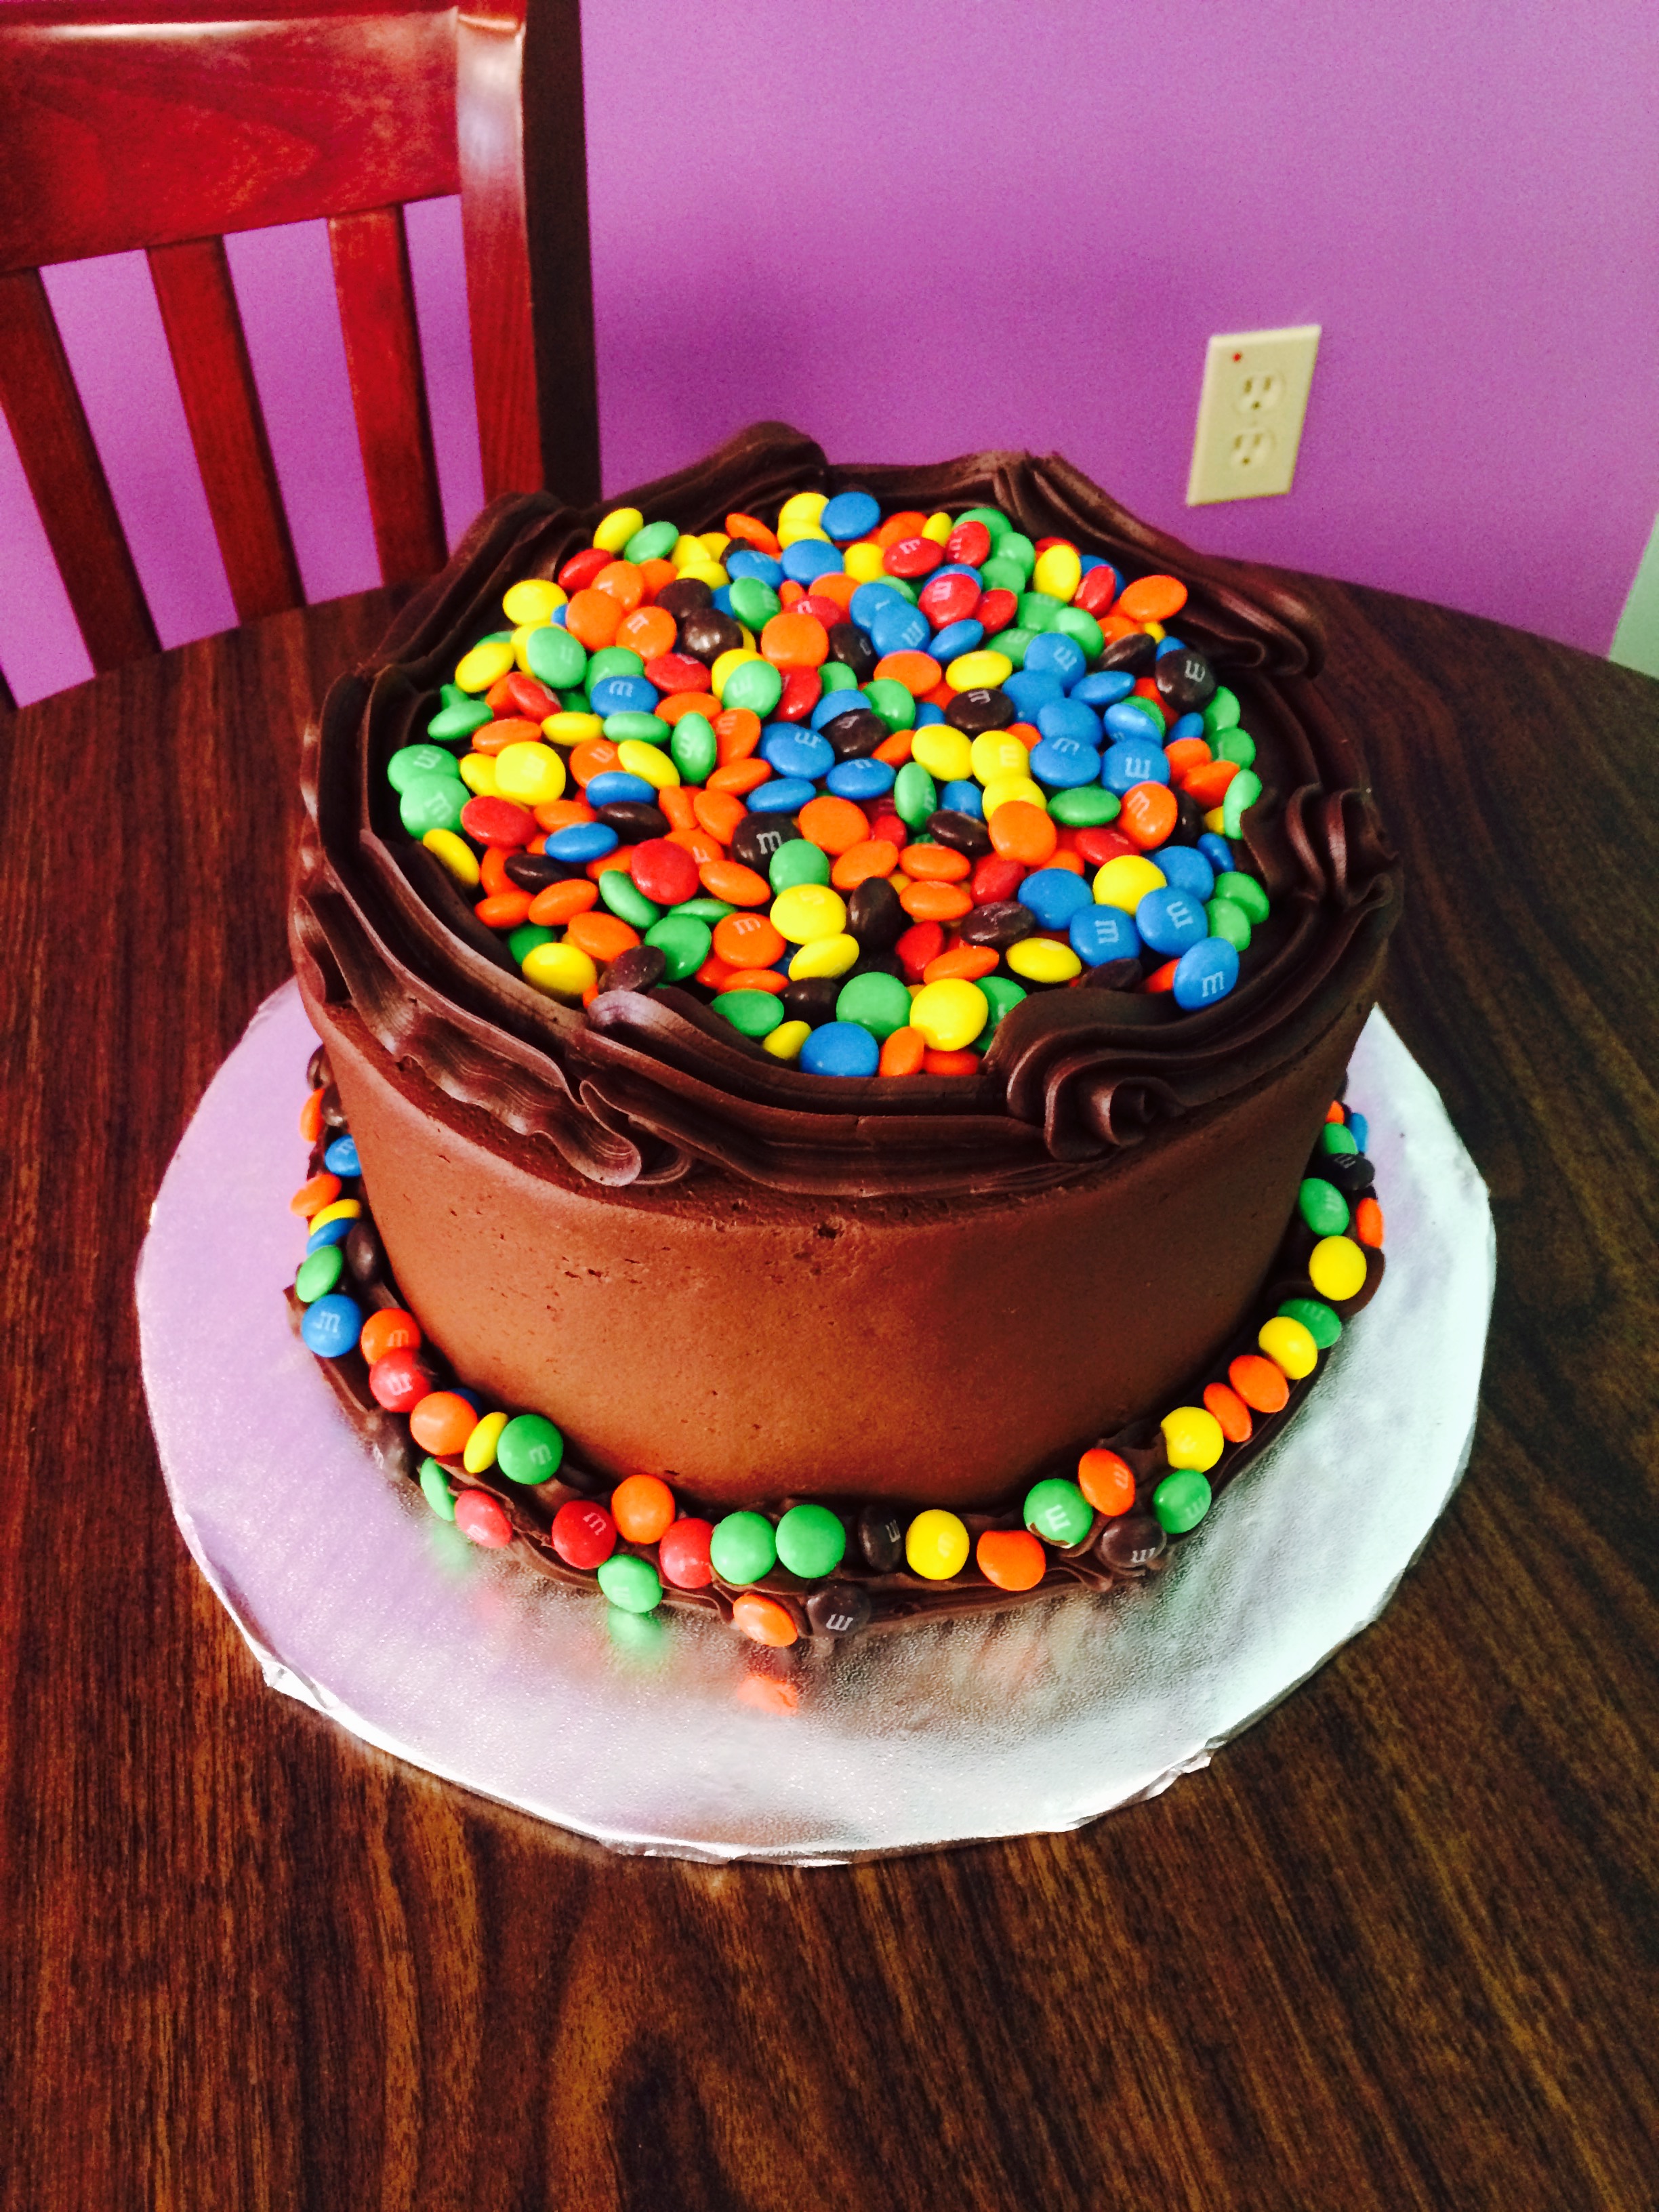 Birthday Cake Delivery & Themed Cakes - Summerville ...